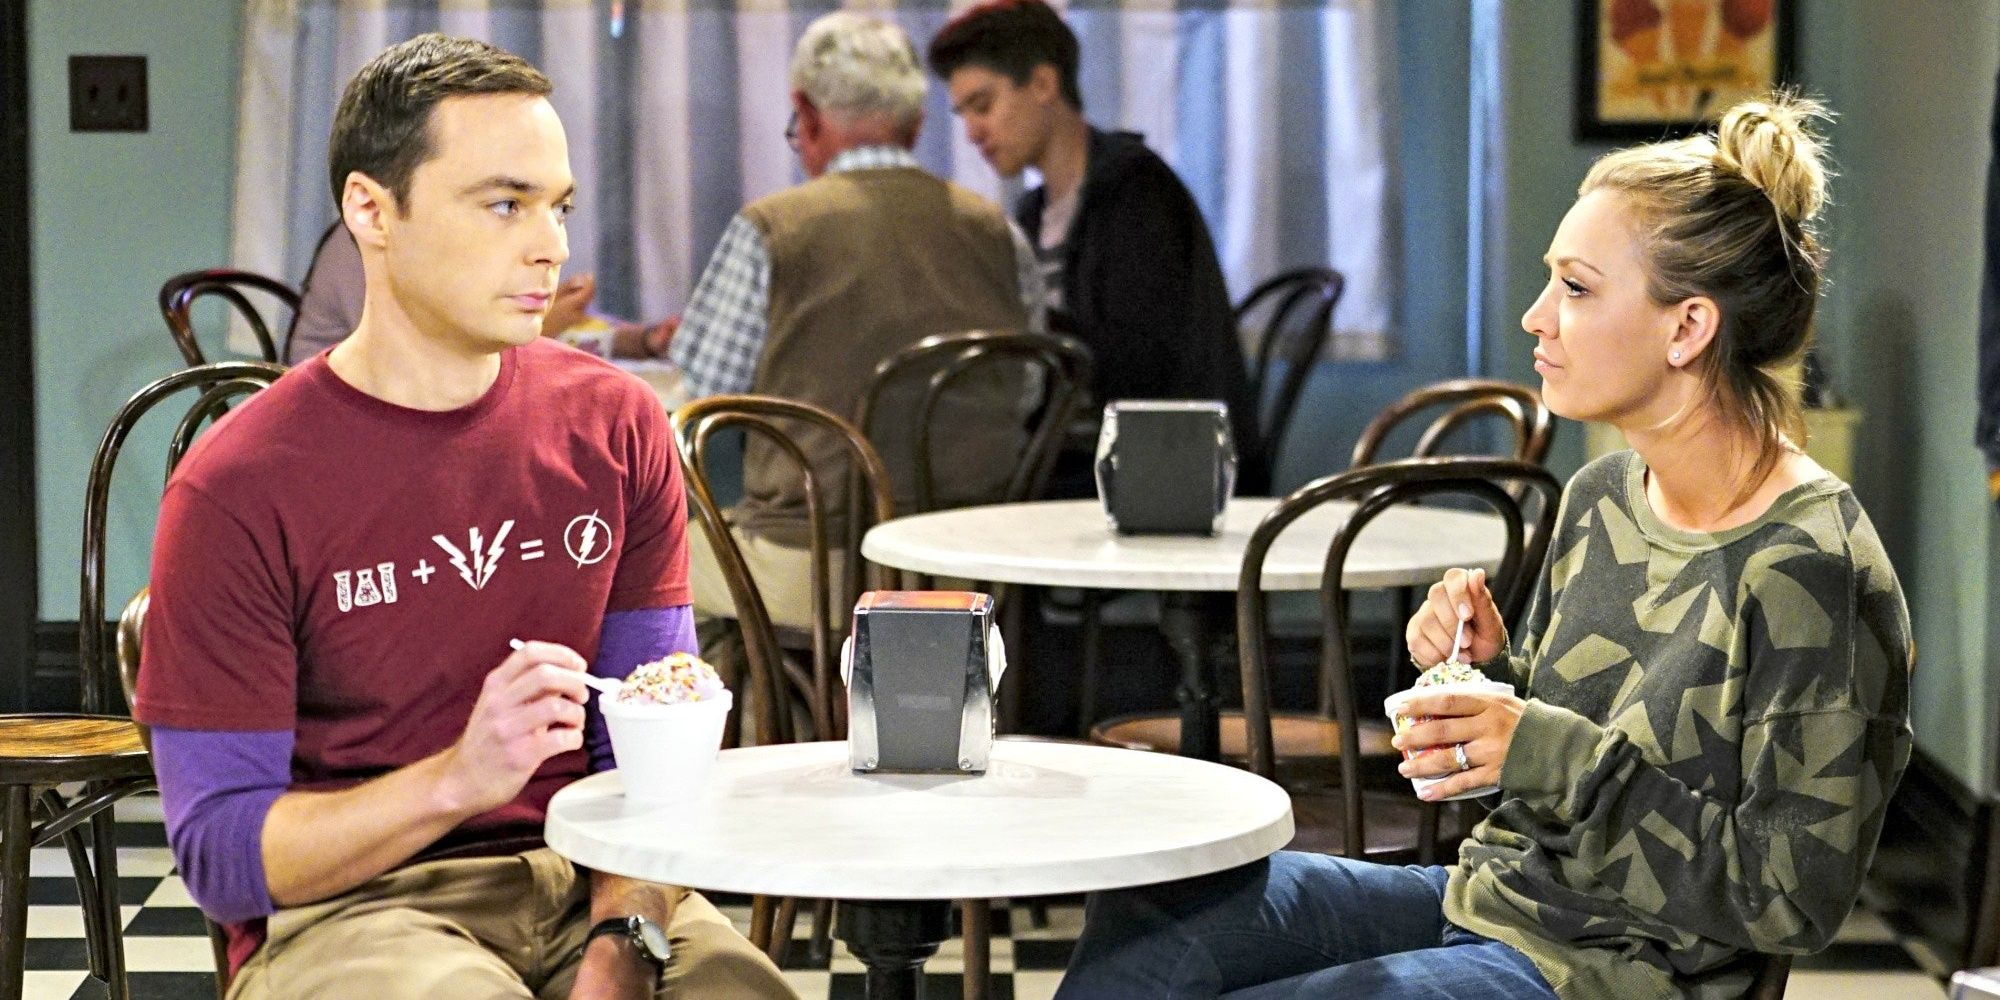 Sheldon and Penny talk in a cafe in The Big Bang Theory season 10